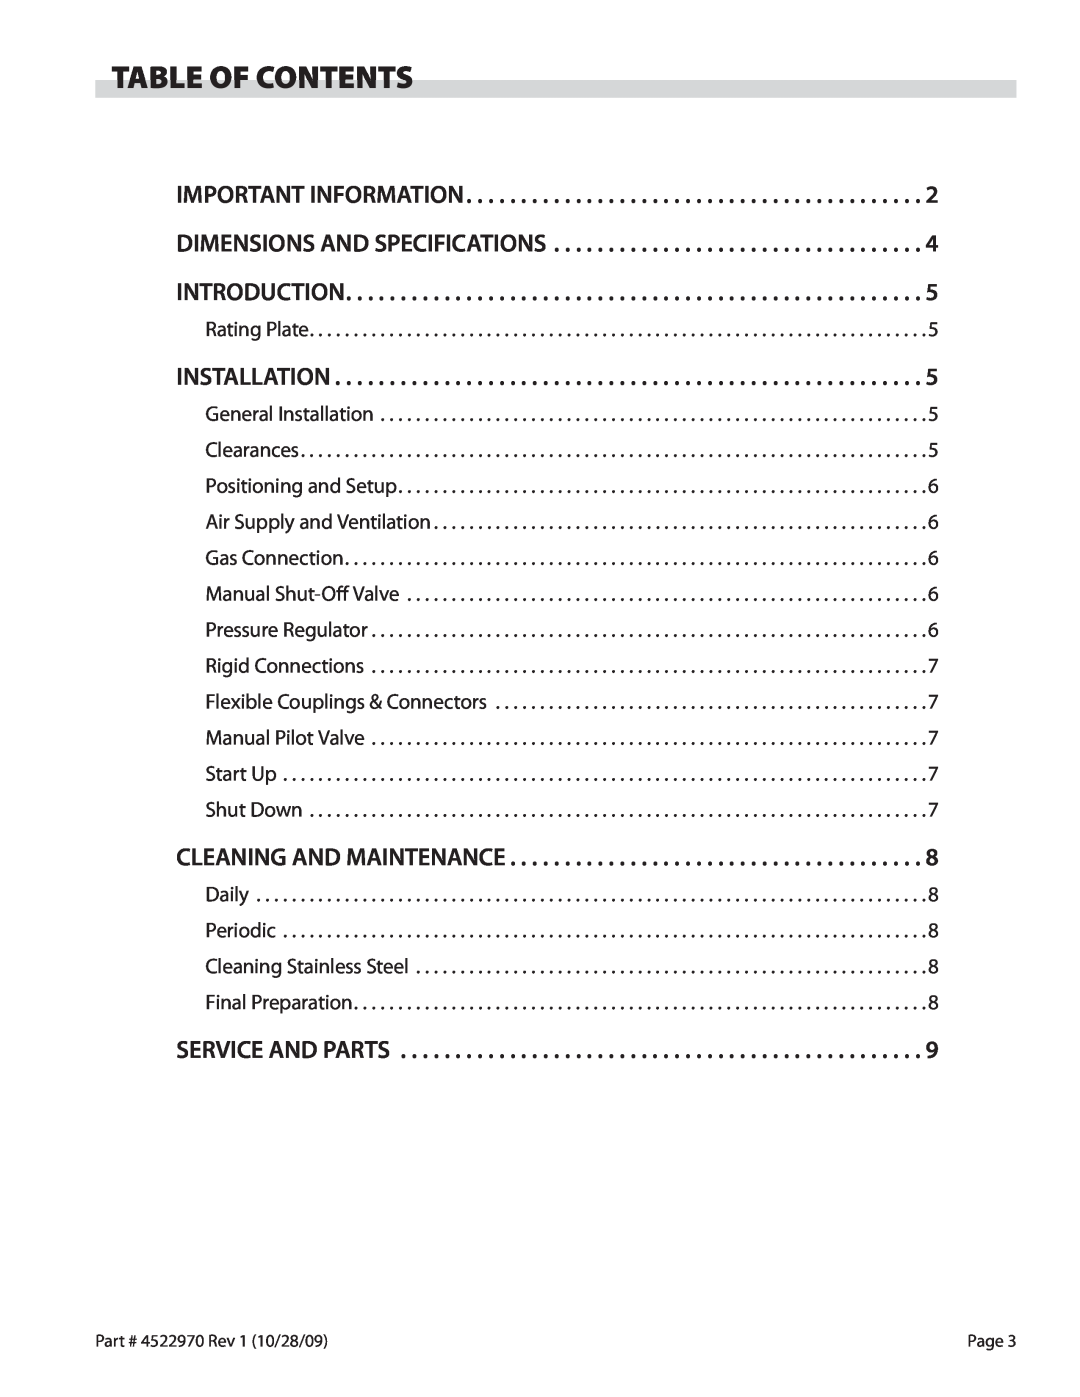 Garland 4522970 REV 1 operation manual Table Of Contents, Cleaning And Maintenance, Installation 